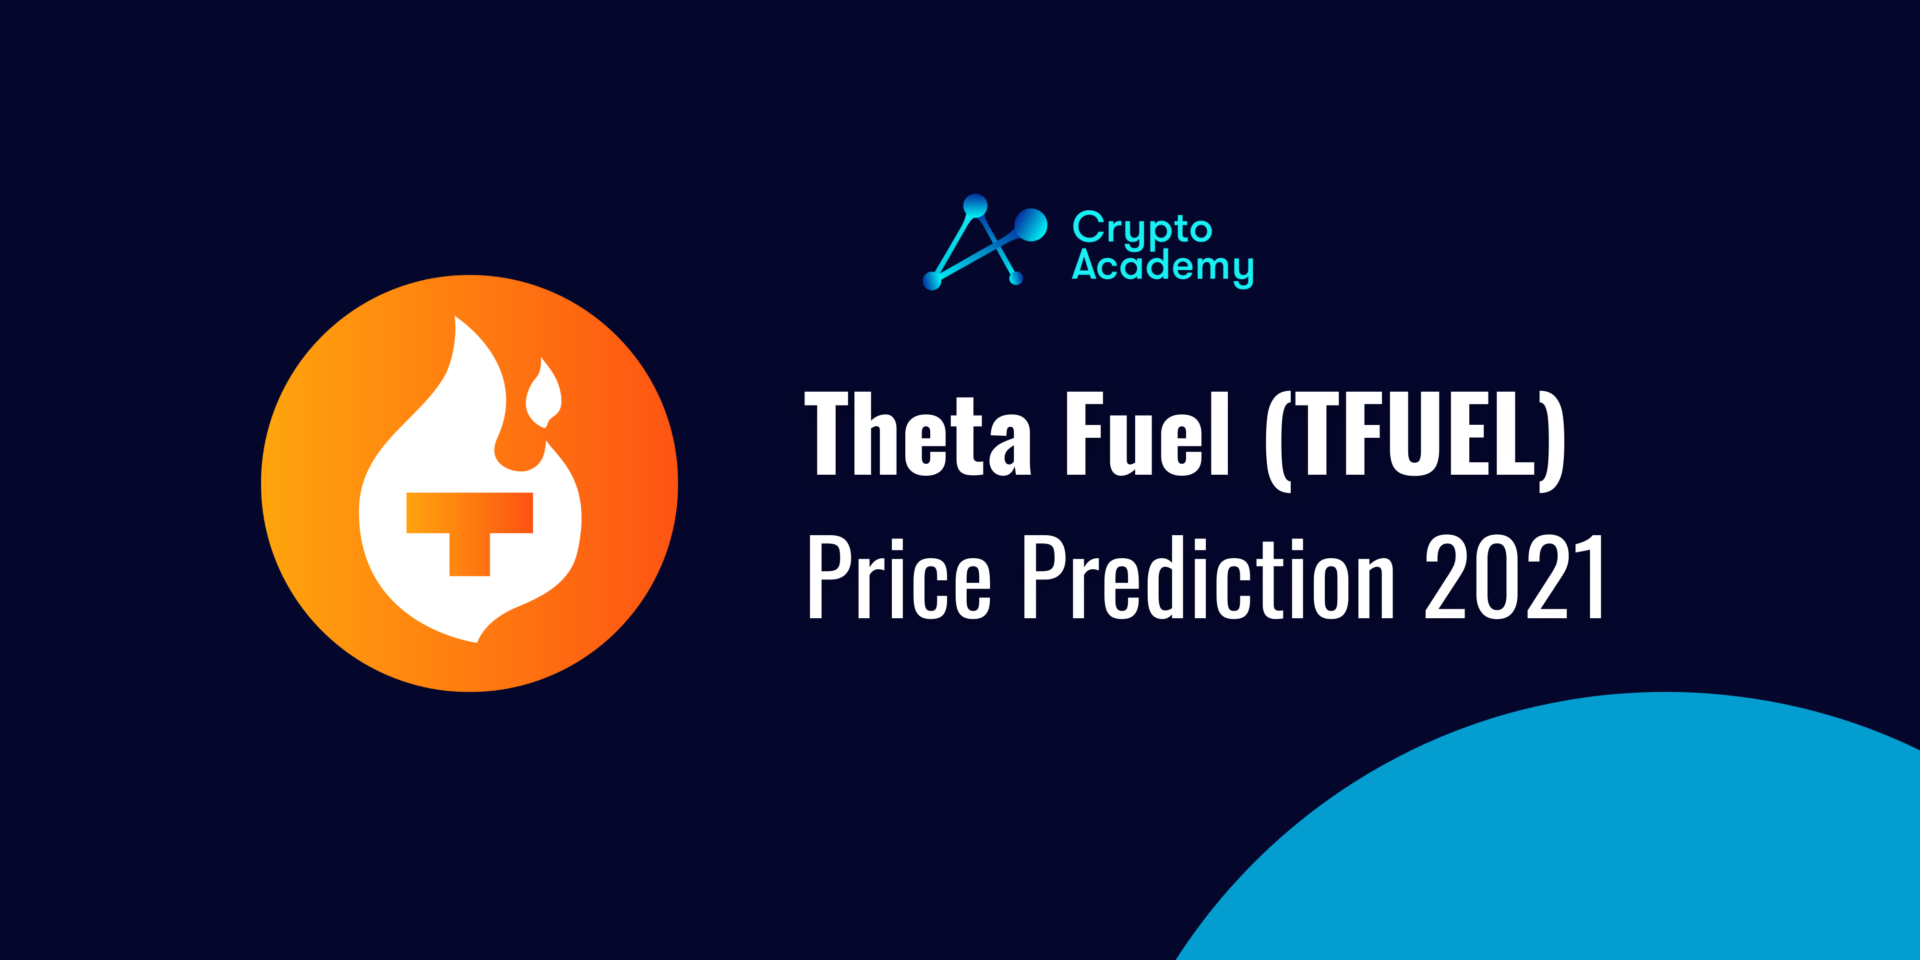 Theta Fuel (TFUEL) Price Prediction 2021 and Beyond – Is TFUEL a Good Investment?